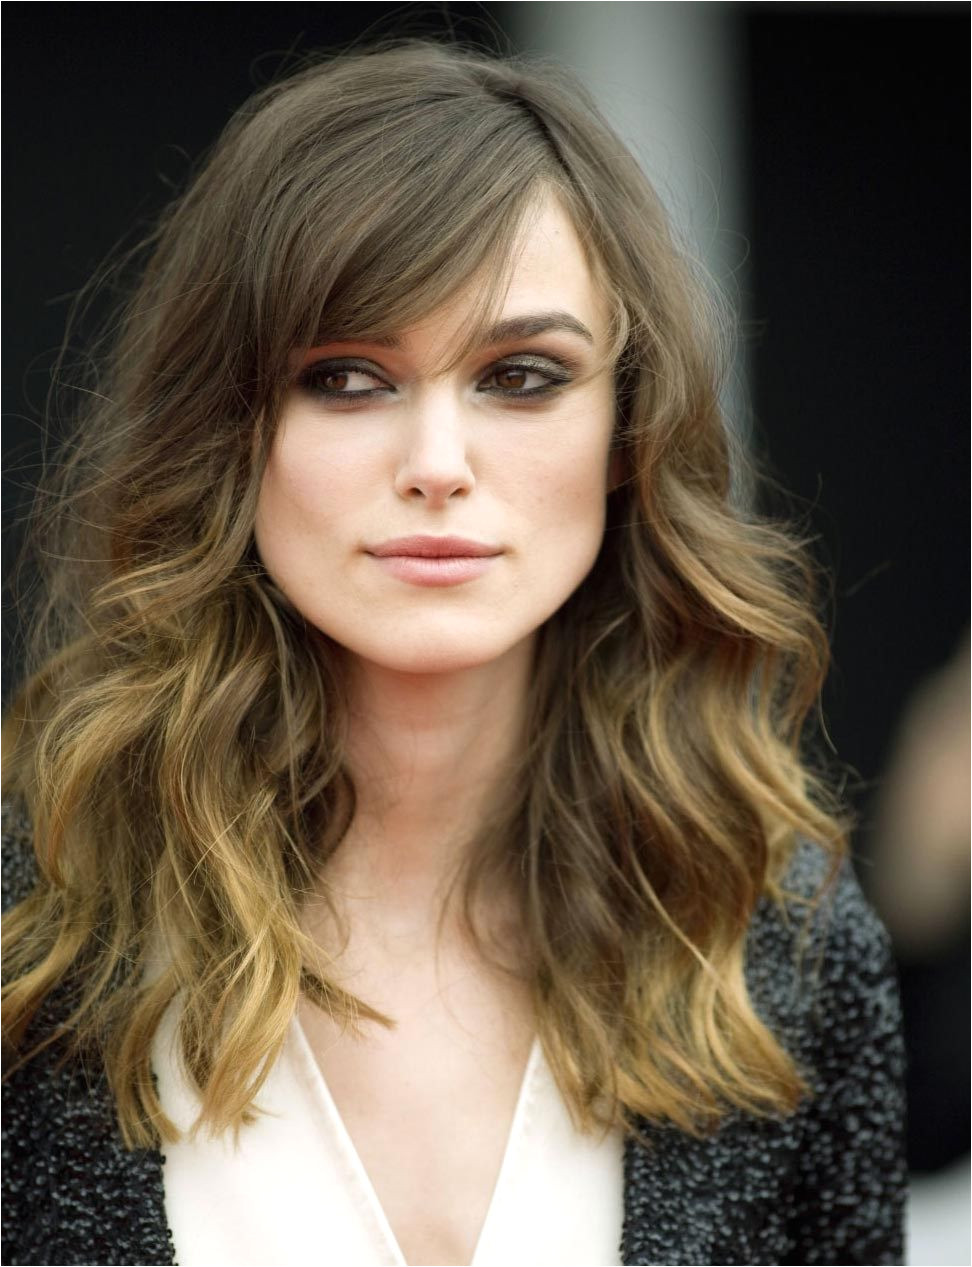 Kiera Knightley has a square face shape What shape is your face Learn how to accentuate the good features with your hairstyle